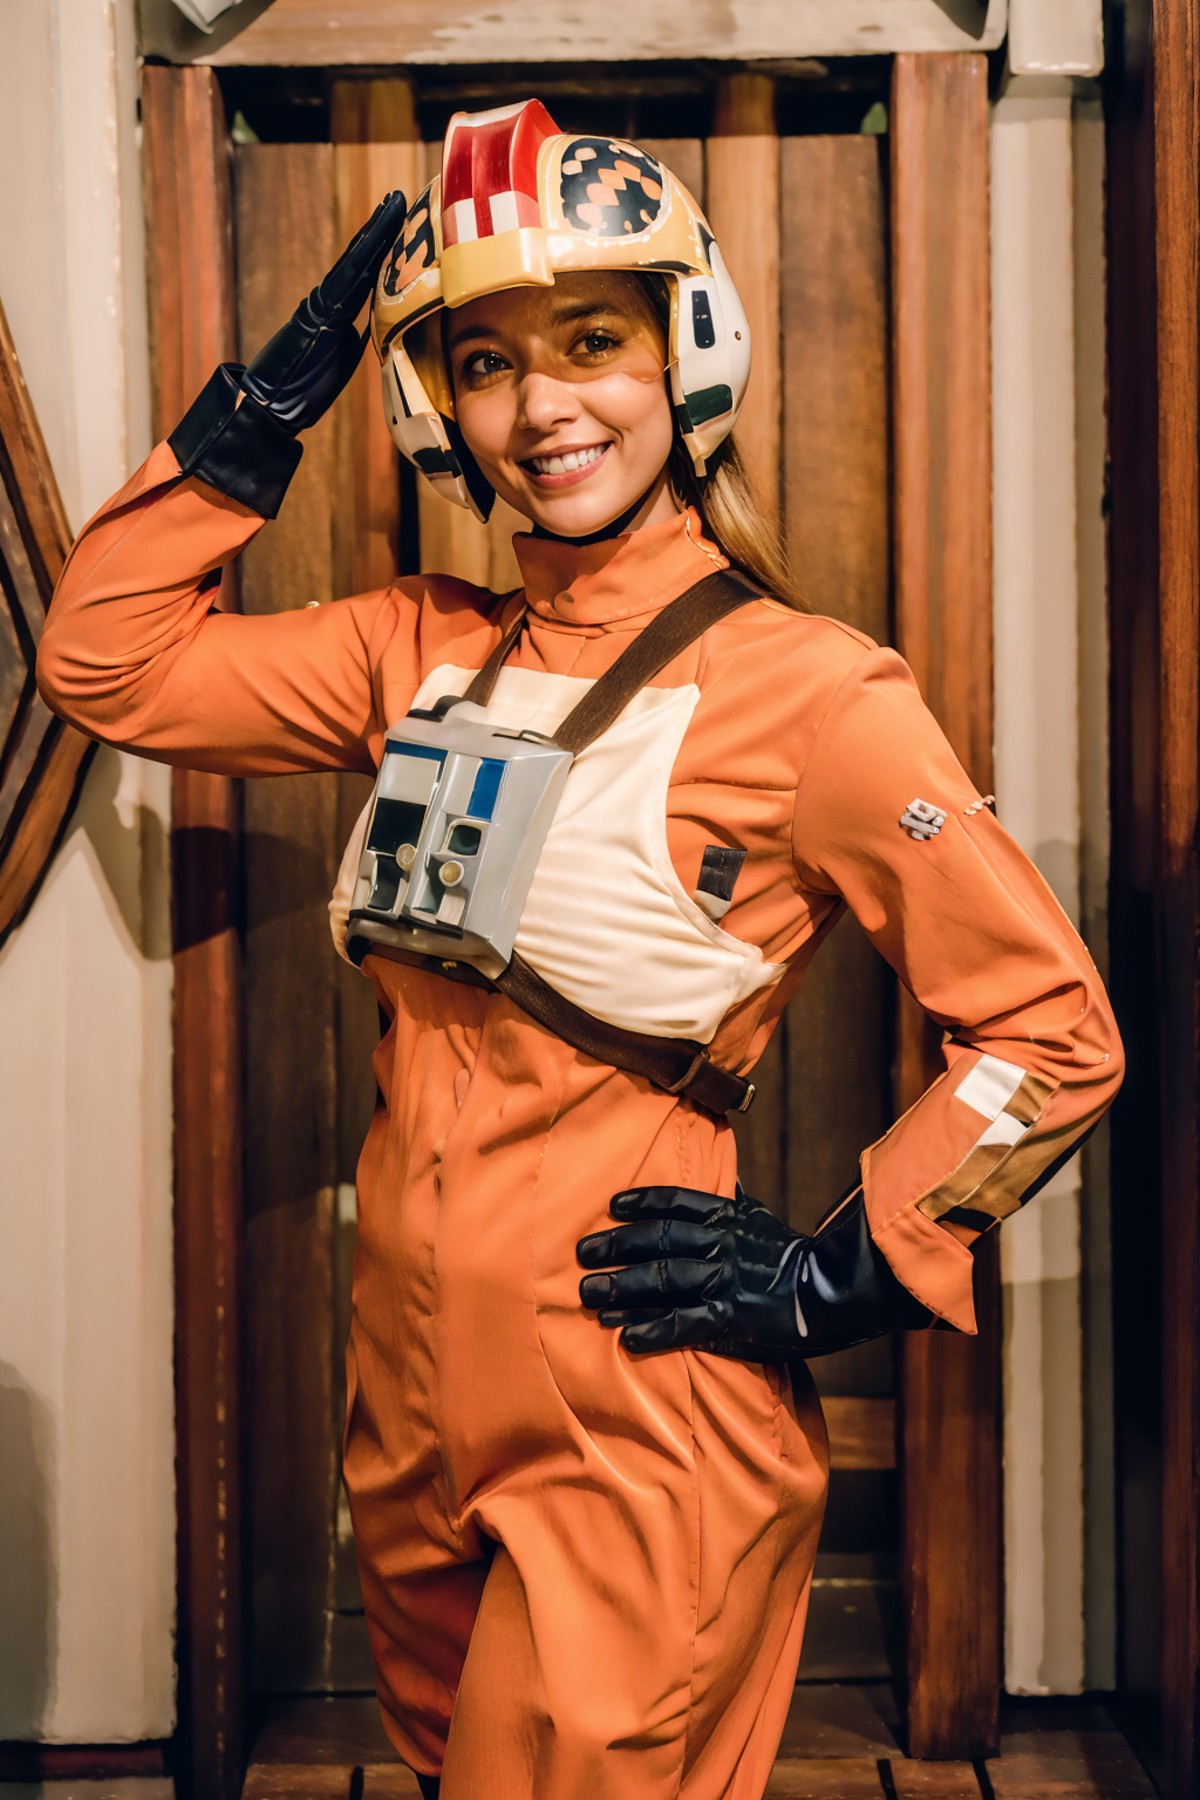 woman in rebel pilot suit,wearing helmet,saluting,in military quarters, masterpiece,intricate details,smiling,blond long h...